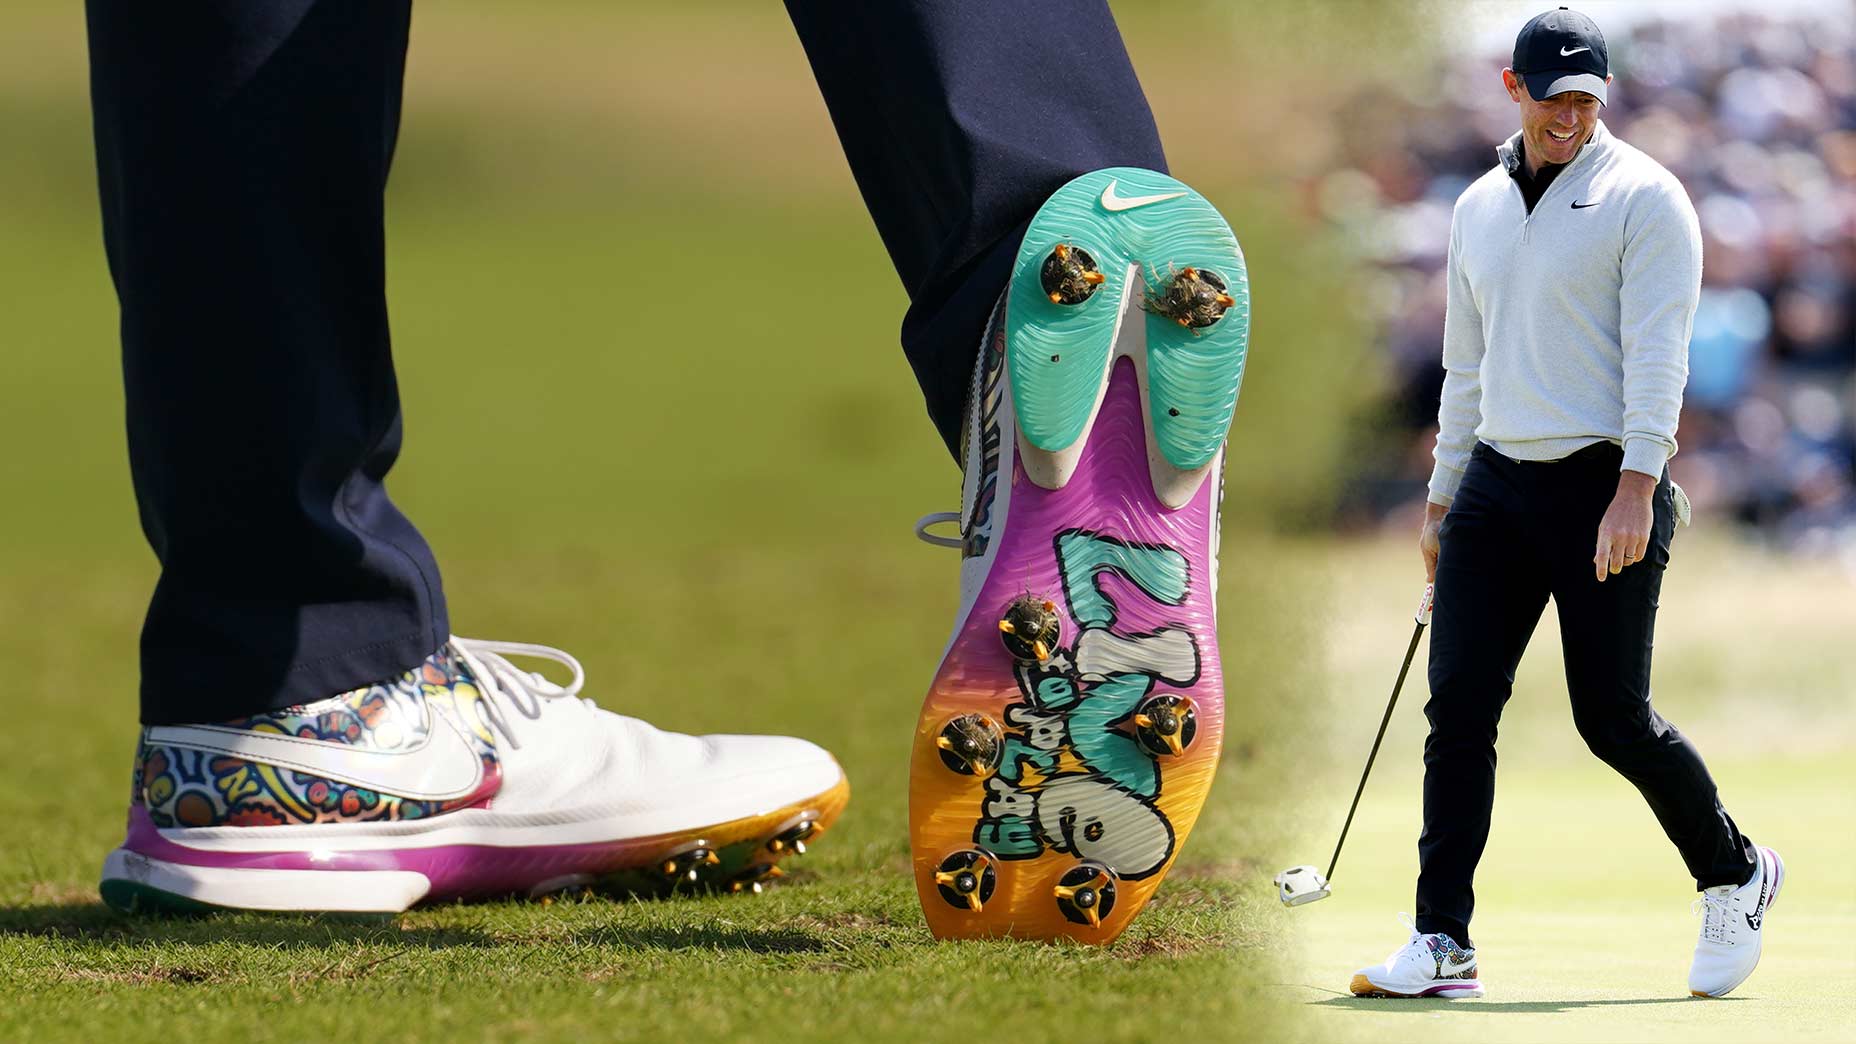 Get these Nike golf shoes at The Open before your size sells